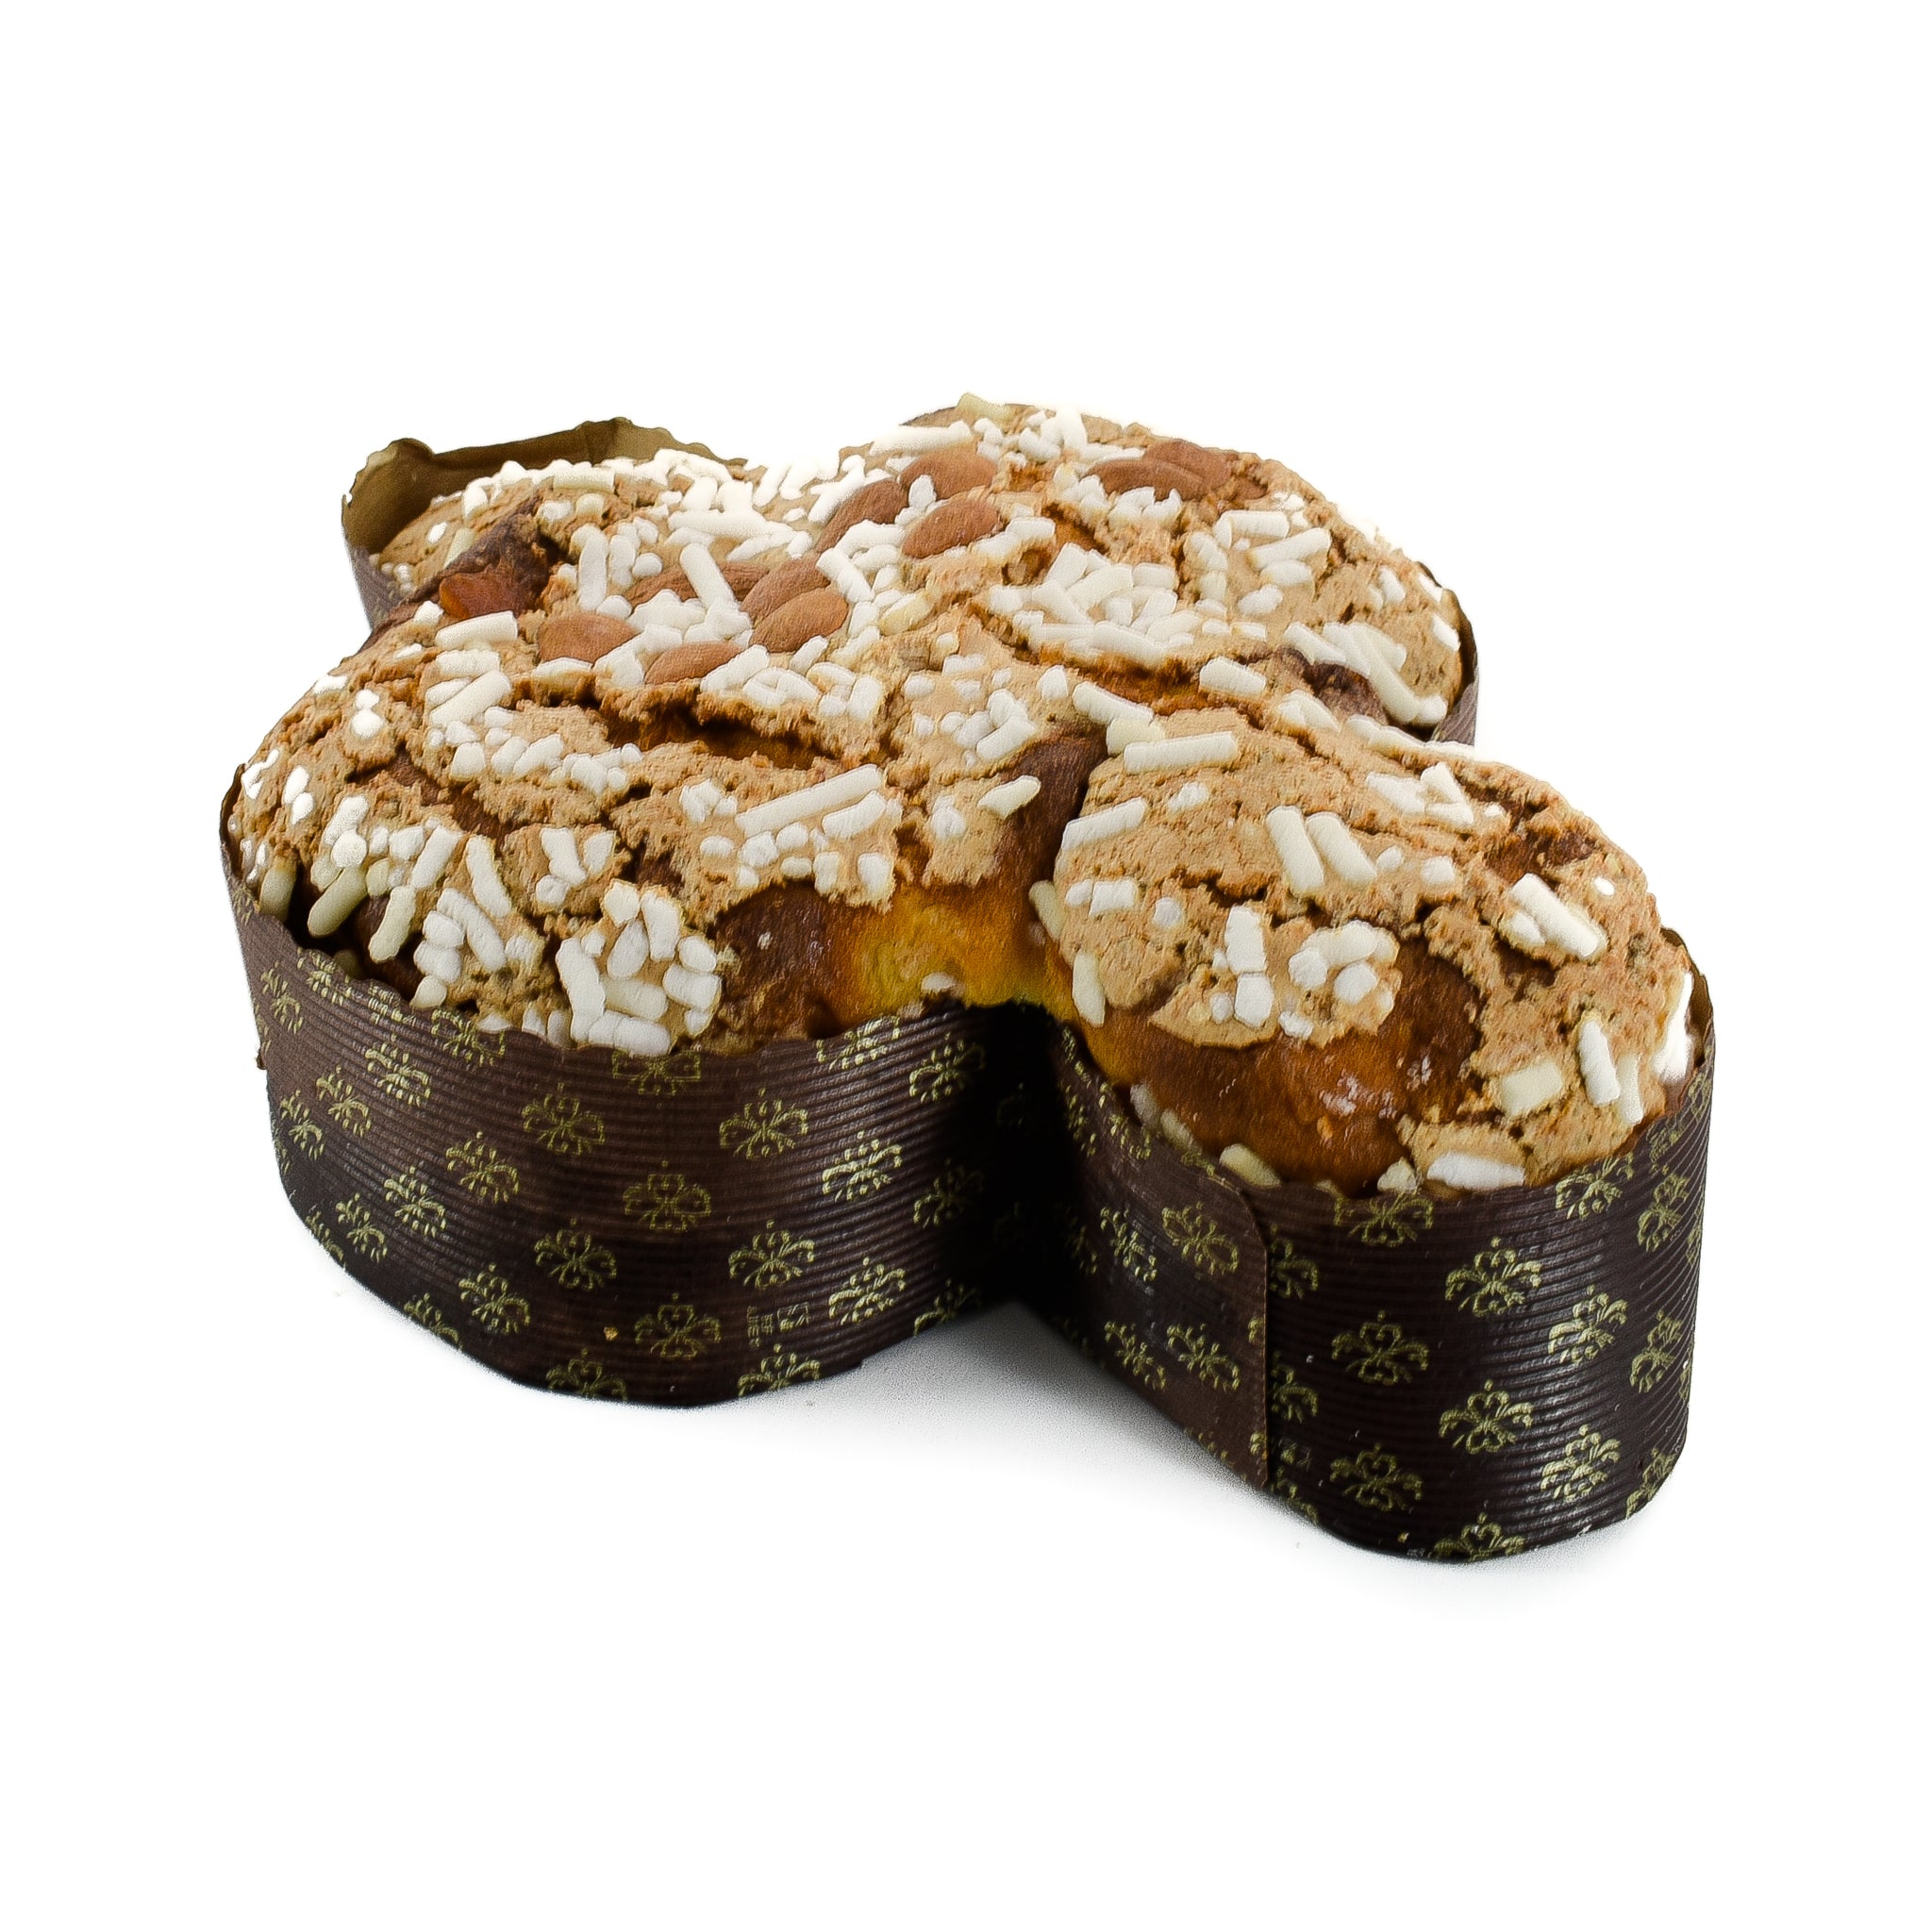 Traditional Colomba with Orange in Faberge Egg Tin